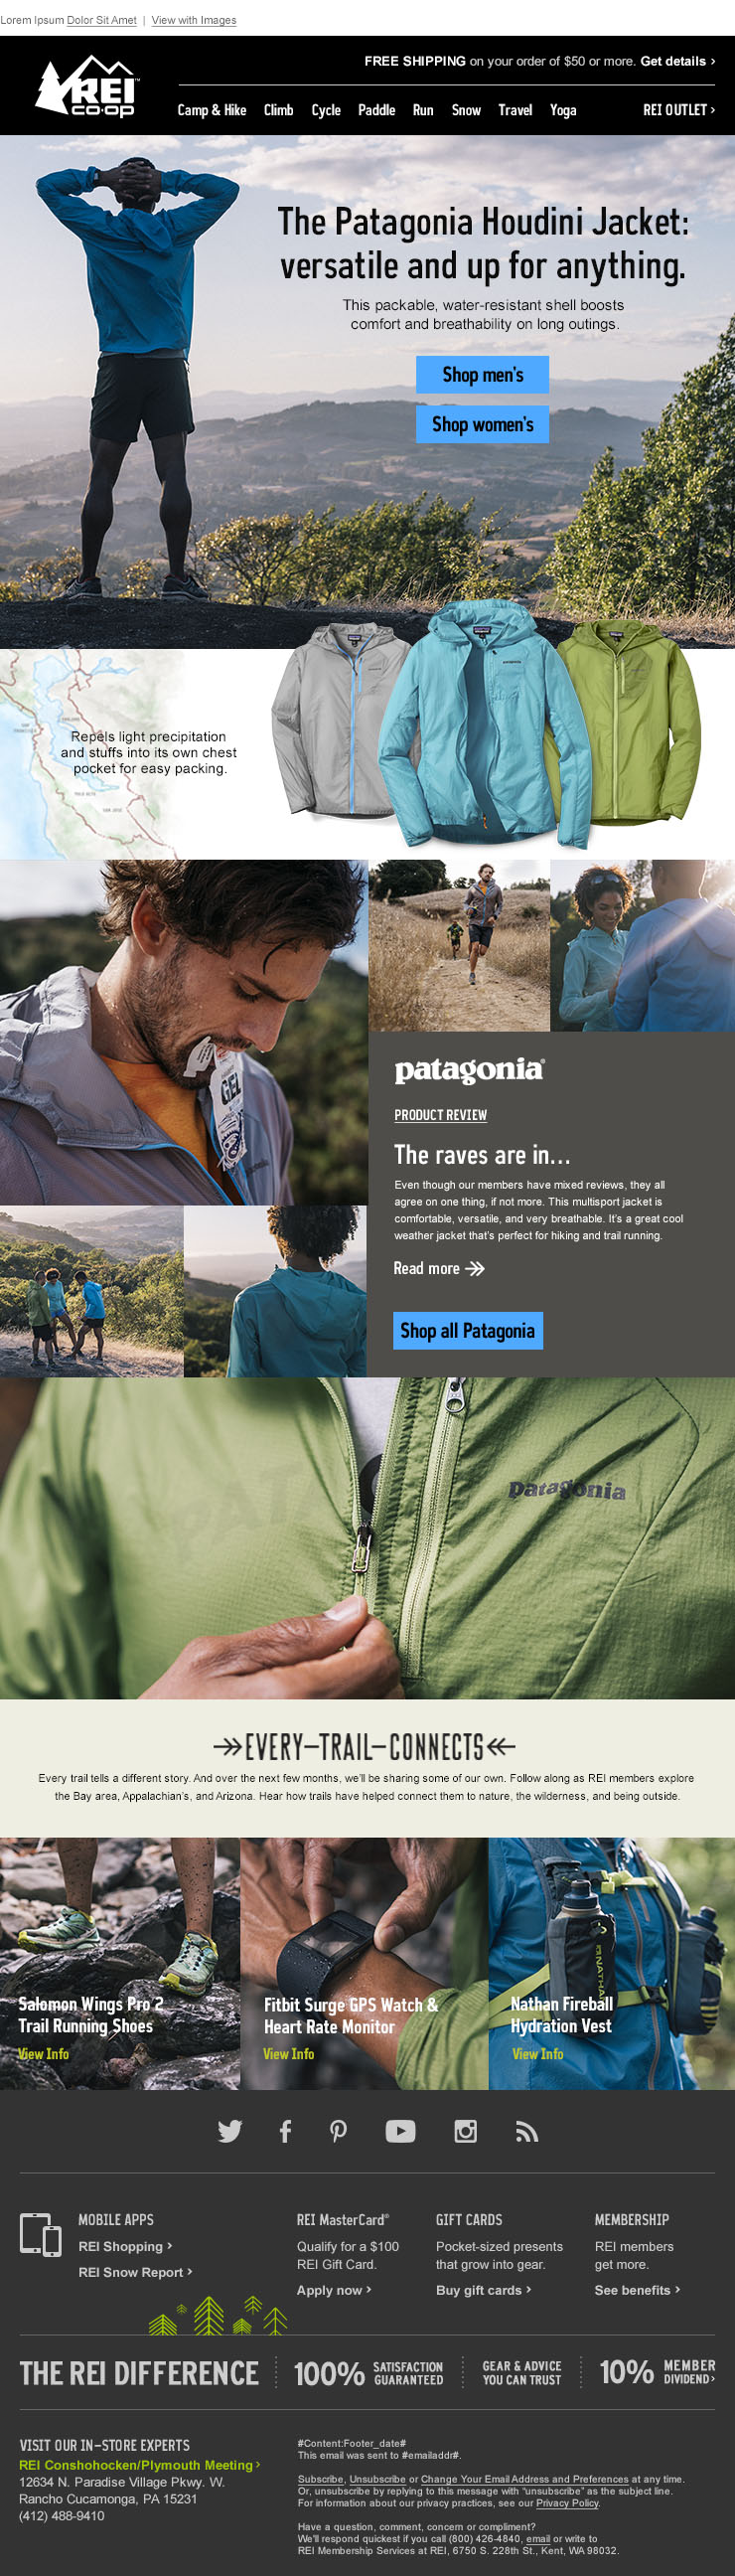 rei_trails2_patagonia_email_products_r2